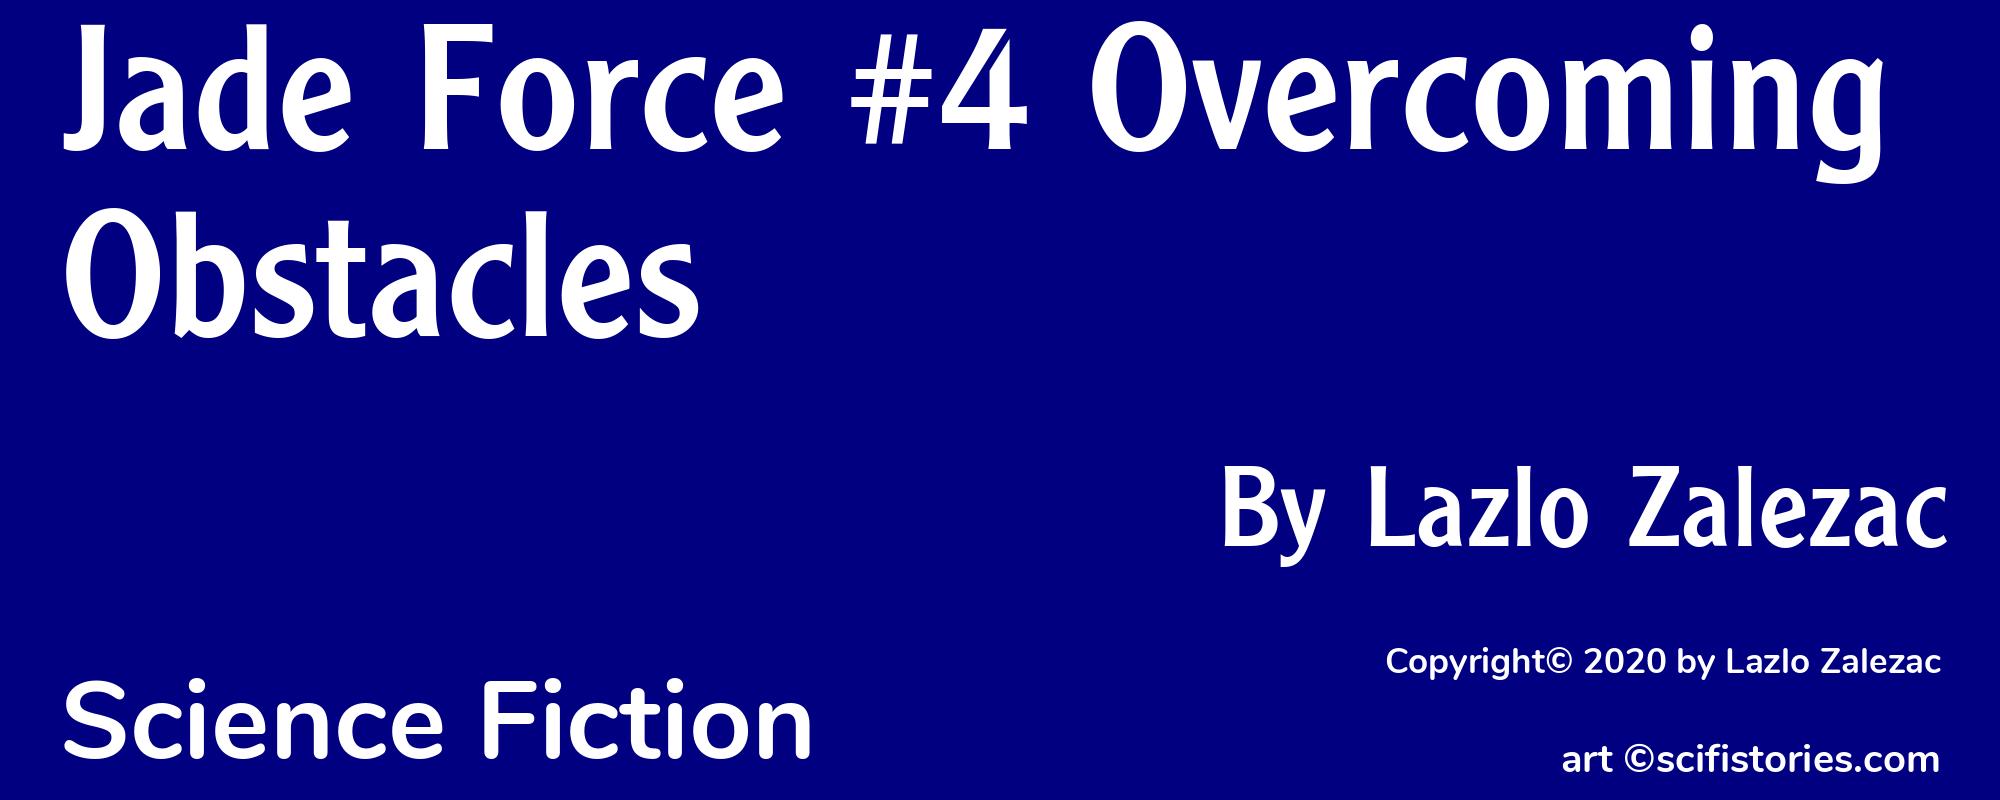 Jade Force #4 Overcoming Obstacles - Cover